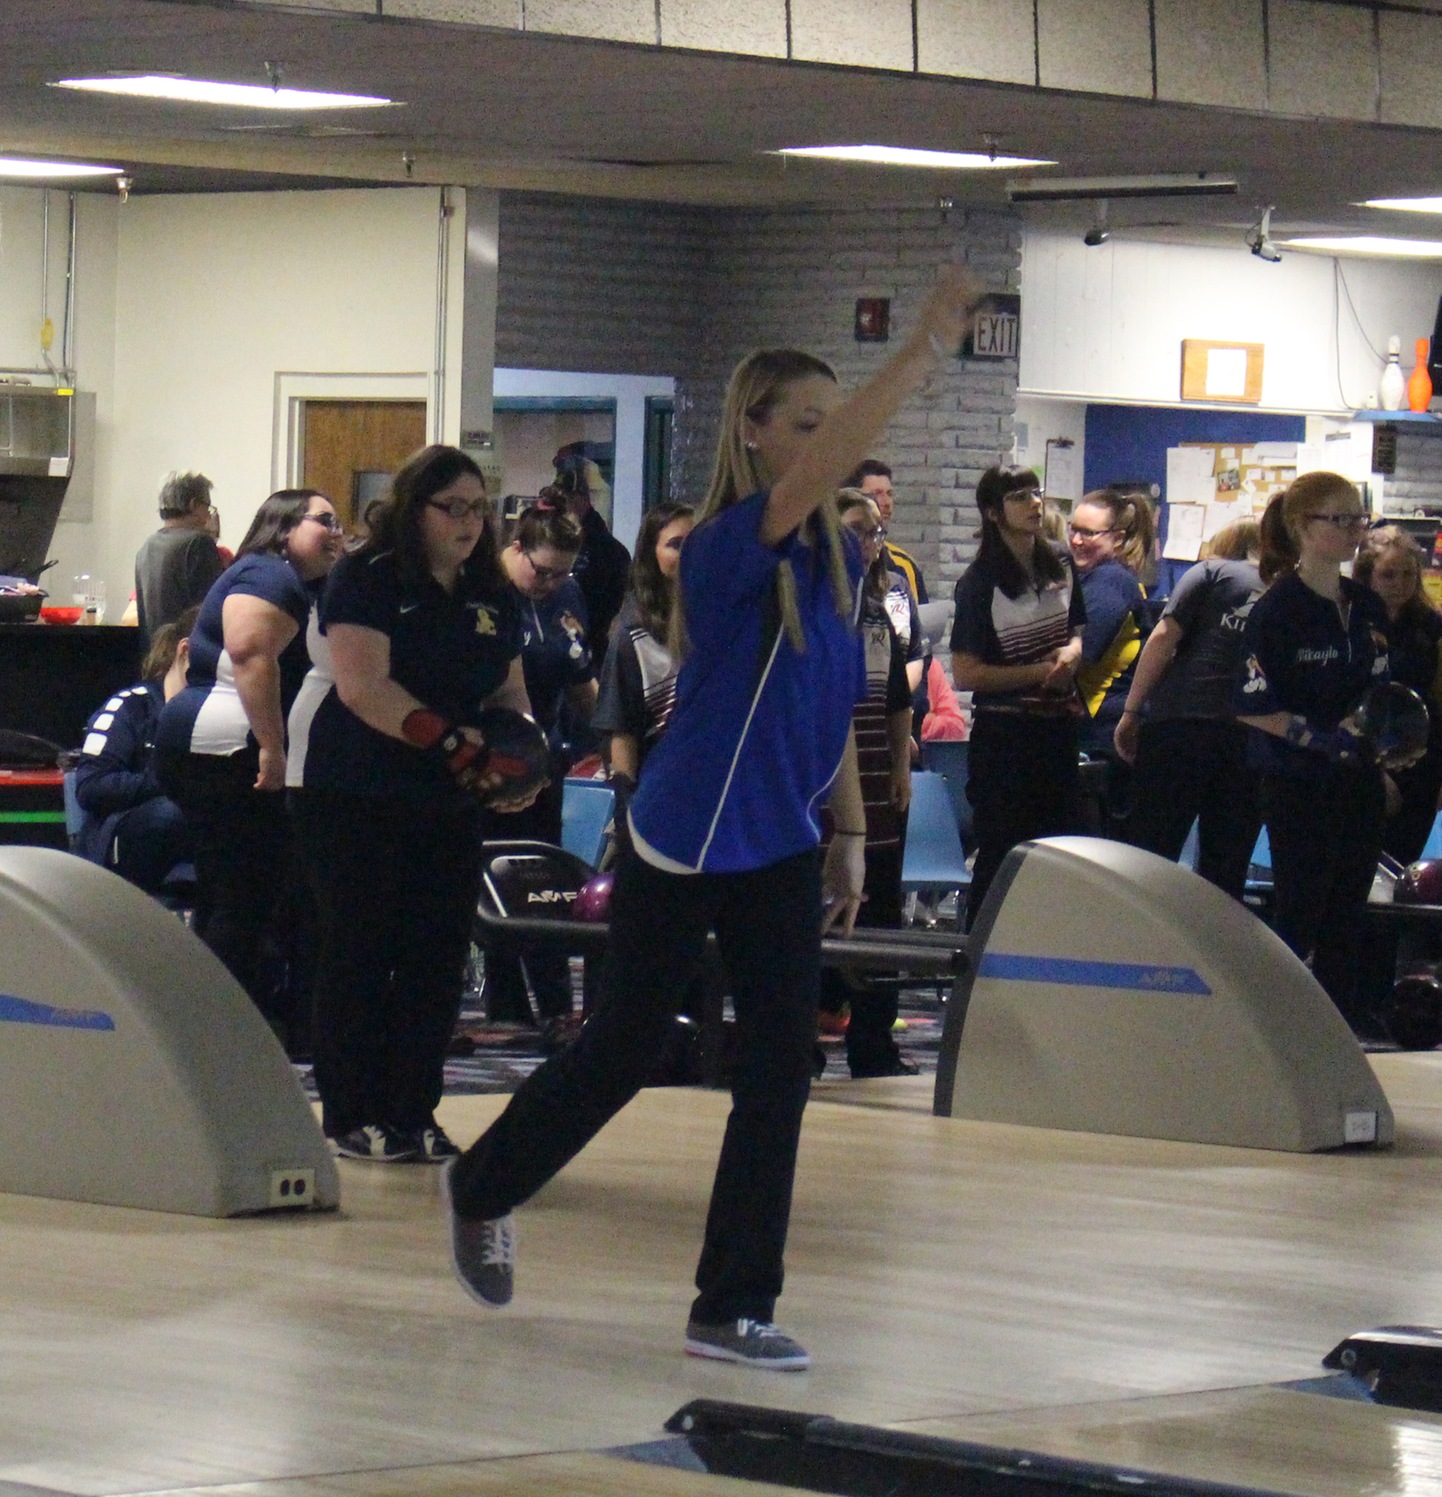 A member of Muskegon CC's women's bowling team during warm ups of the Kirtland CC Invitational